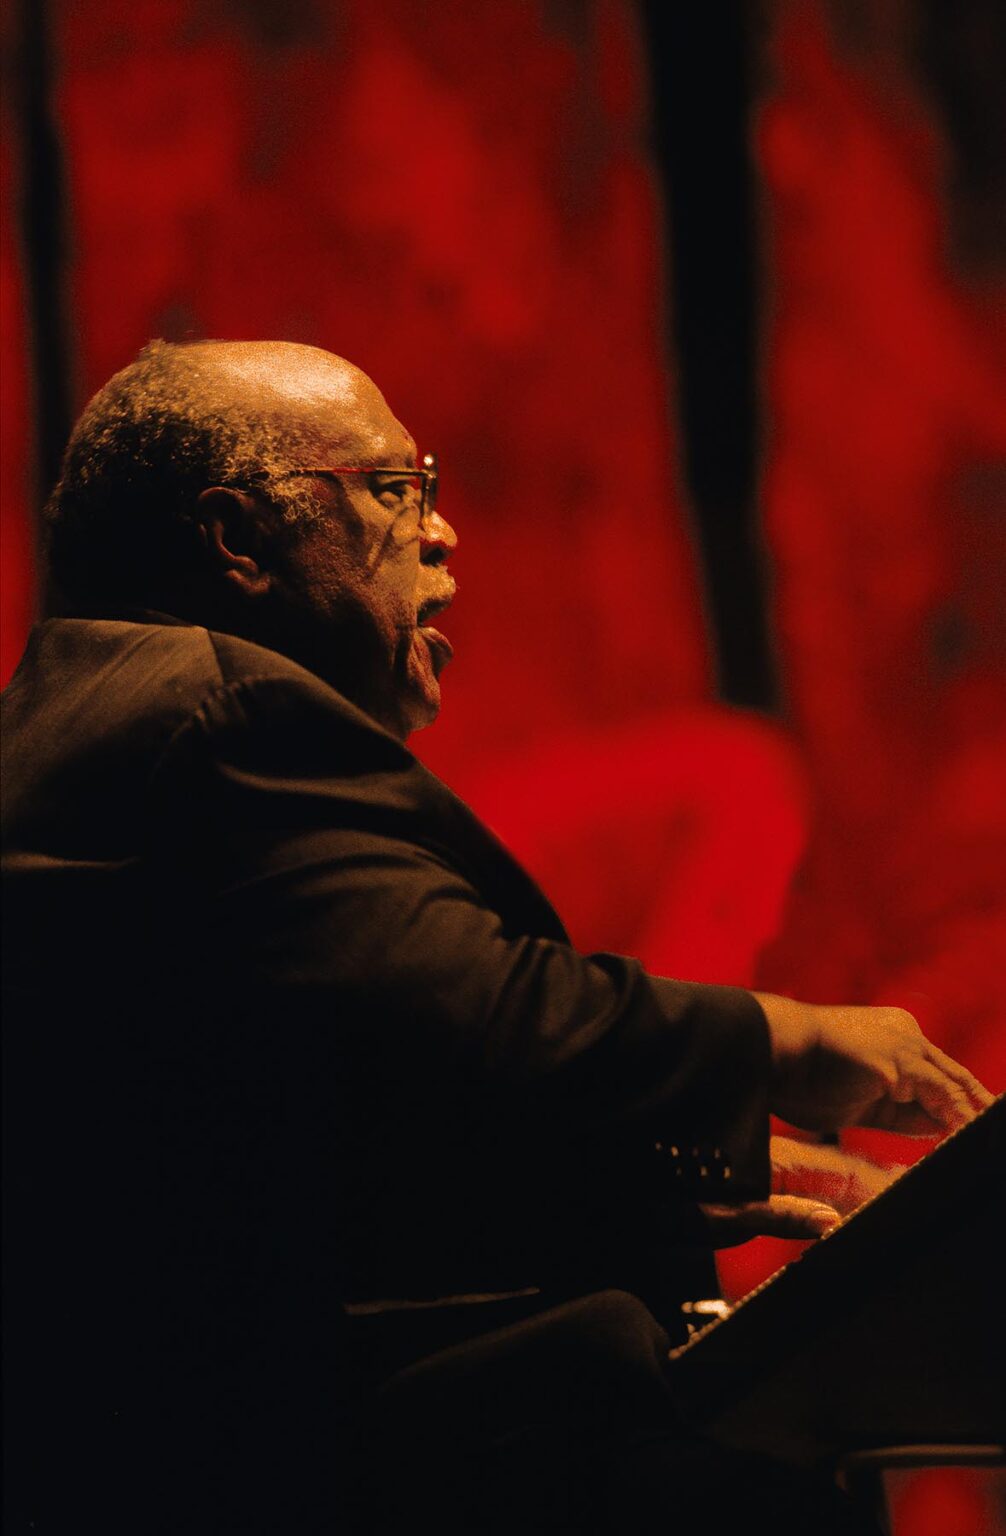 LES McCANN plays the PIANO and SINGS at the MONTEREY JAZZ FESTIVAL - CALIFORNIA